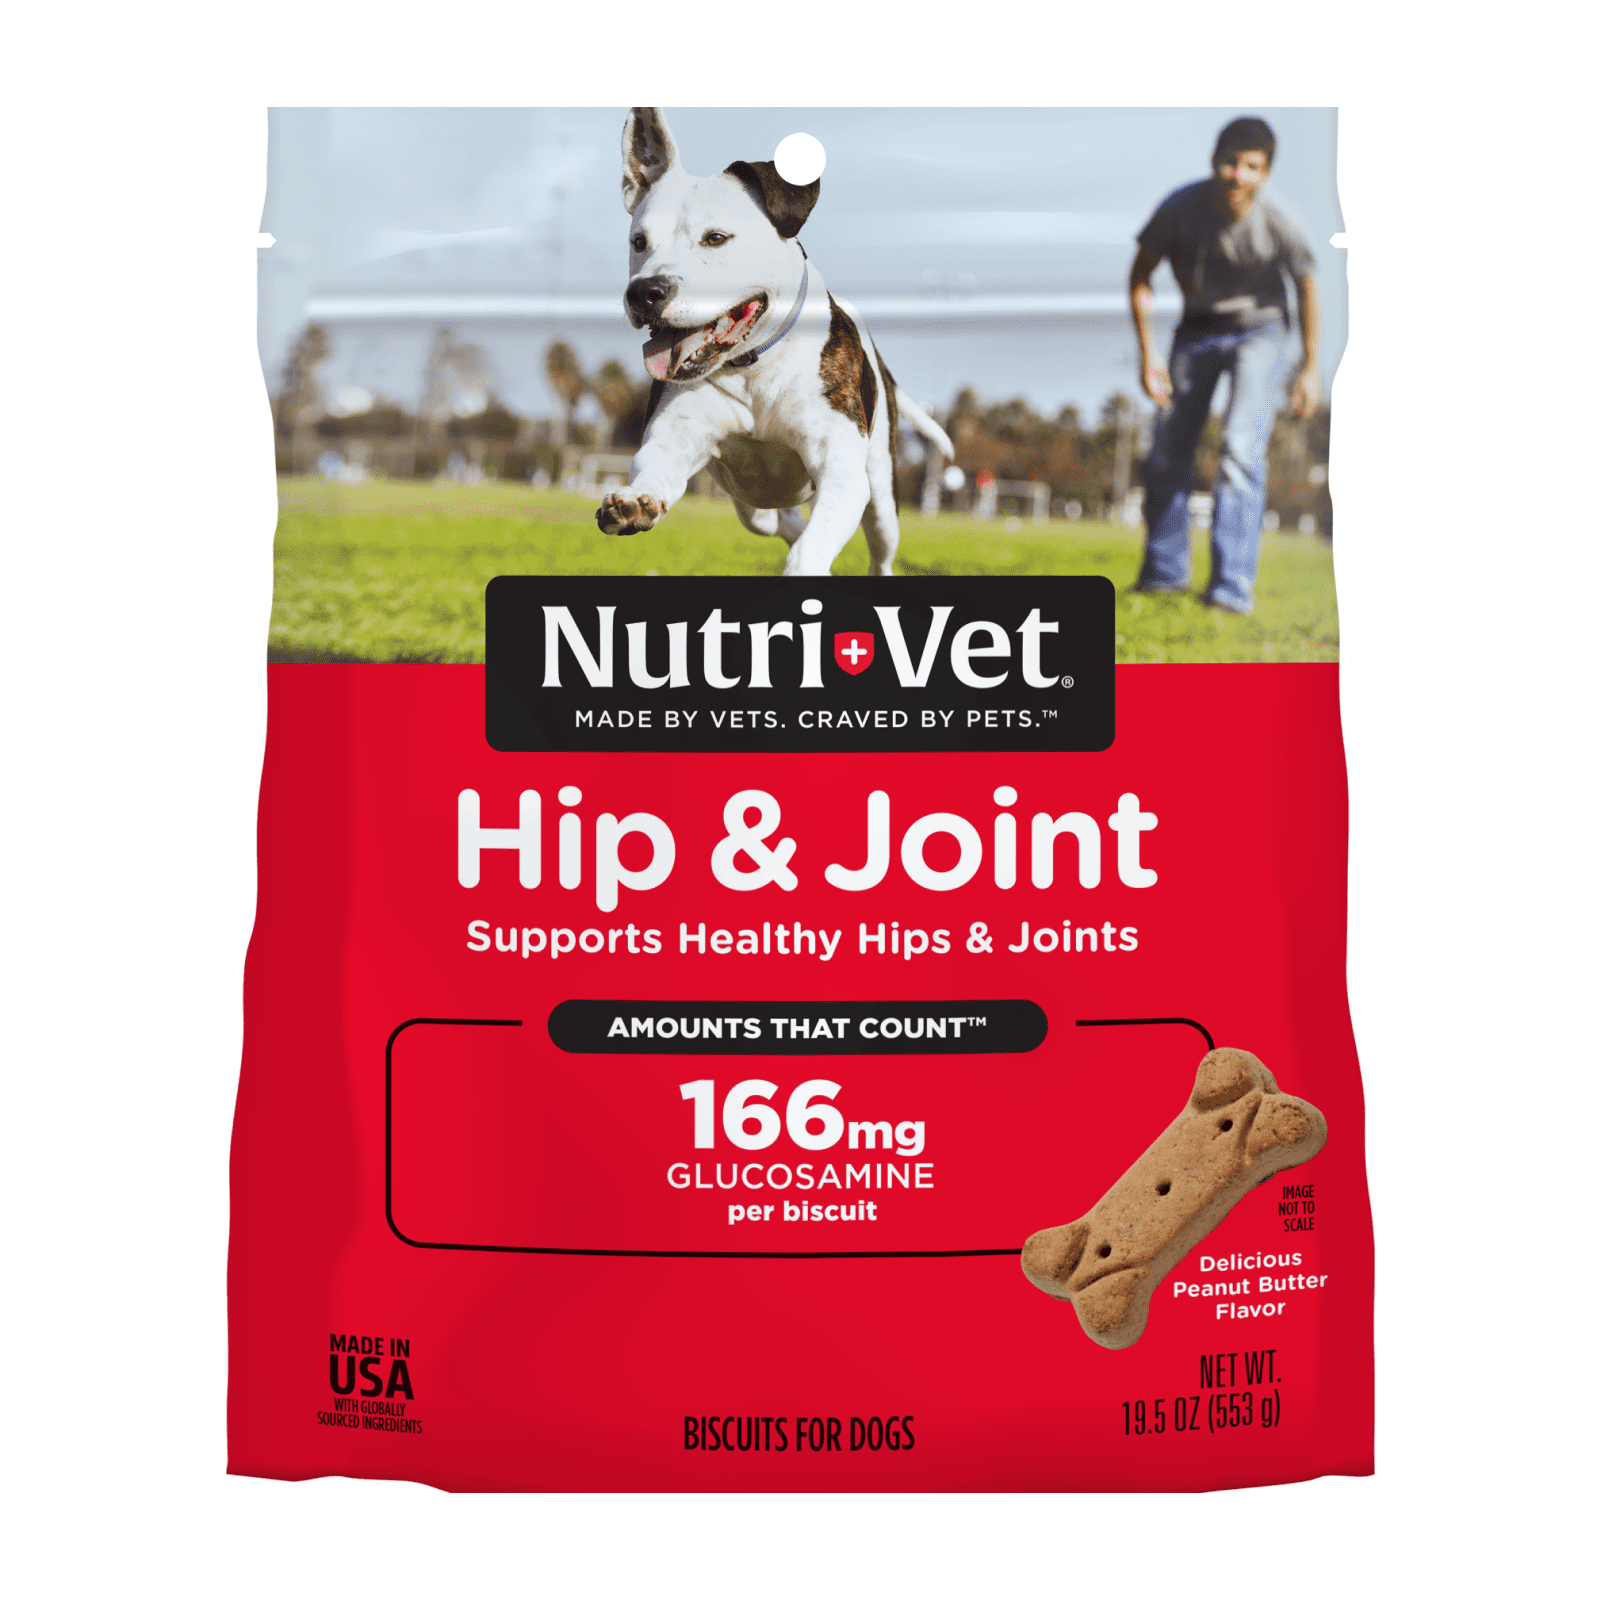 Nutri-Vet Hip & Joint Biscuits for Dogs - Tasty Dog Glucosamine Treat ...